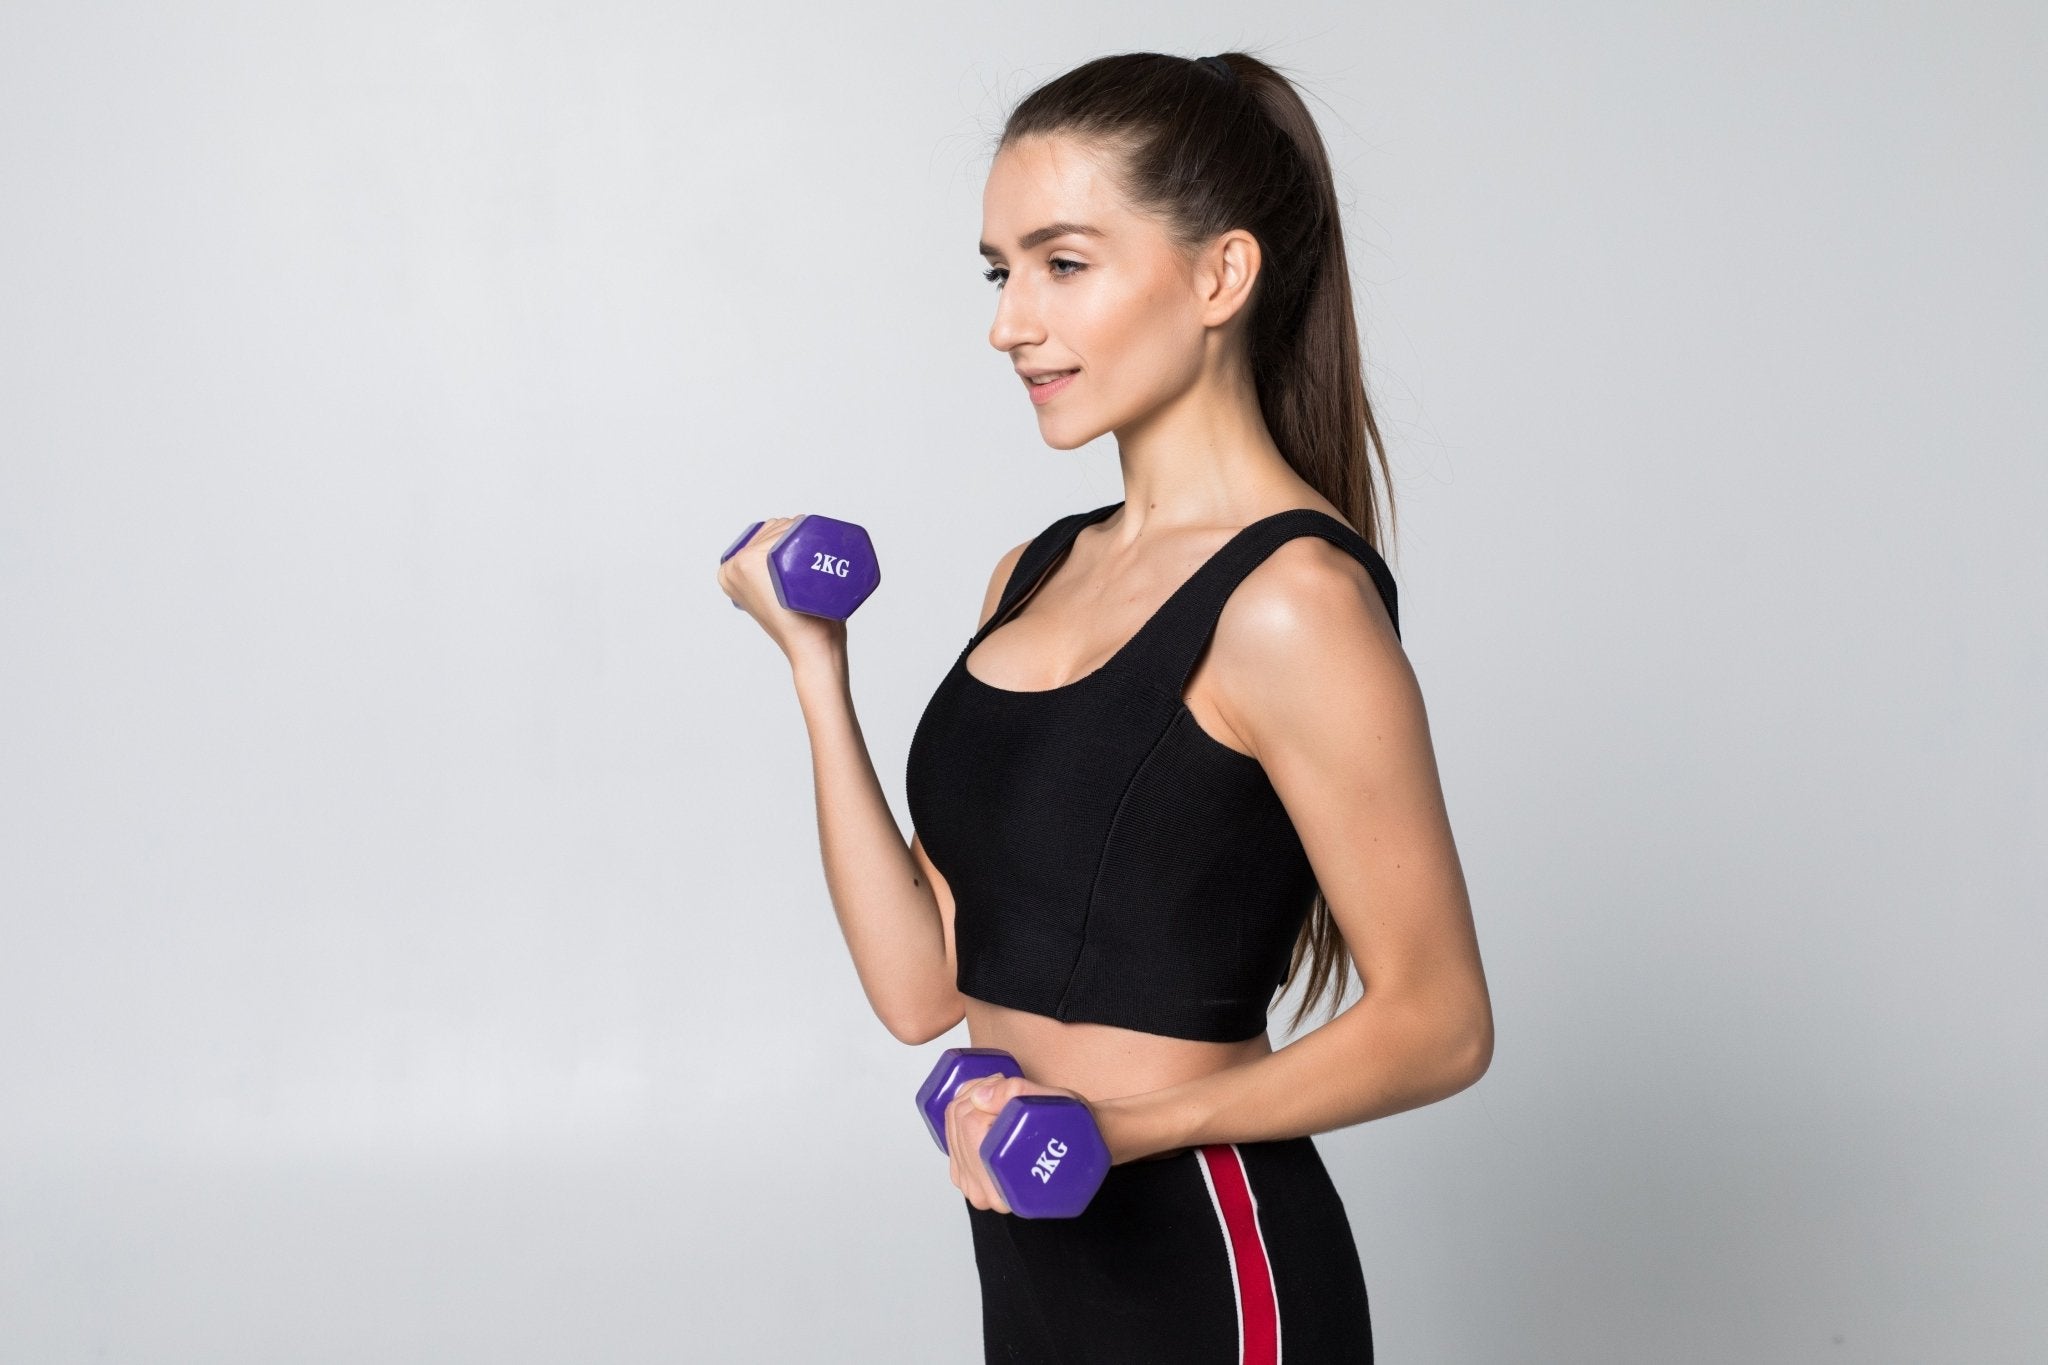 Why You Should Invest In Personal Trainers and Workout Apparel - plusminusco.com